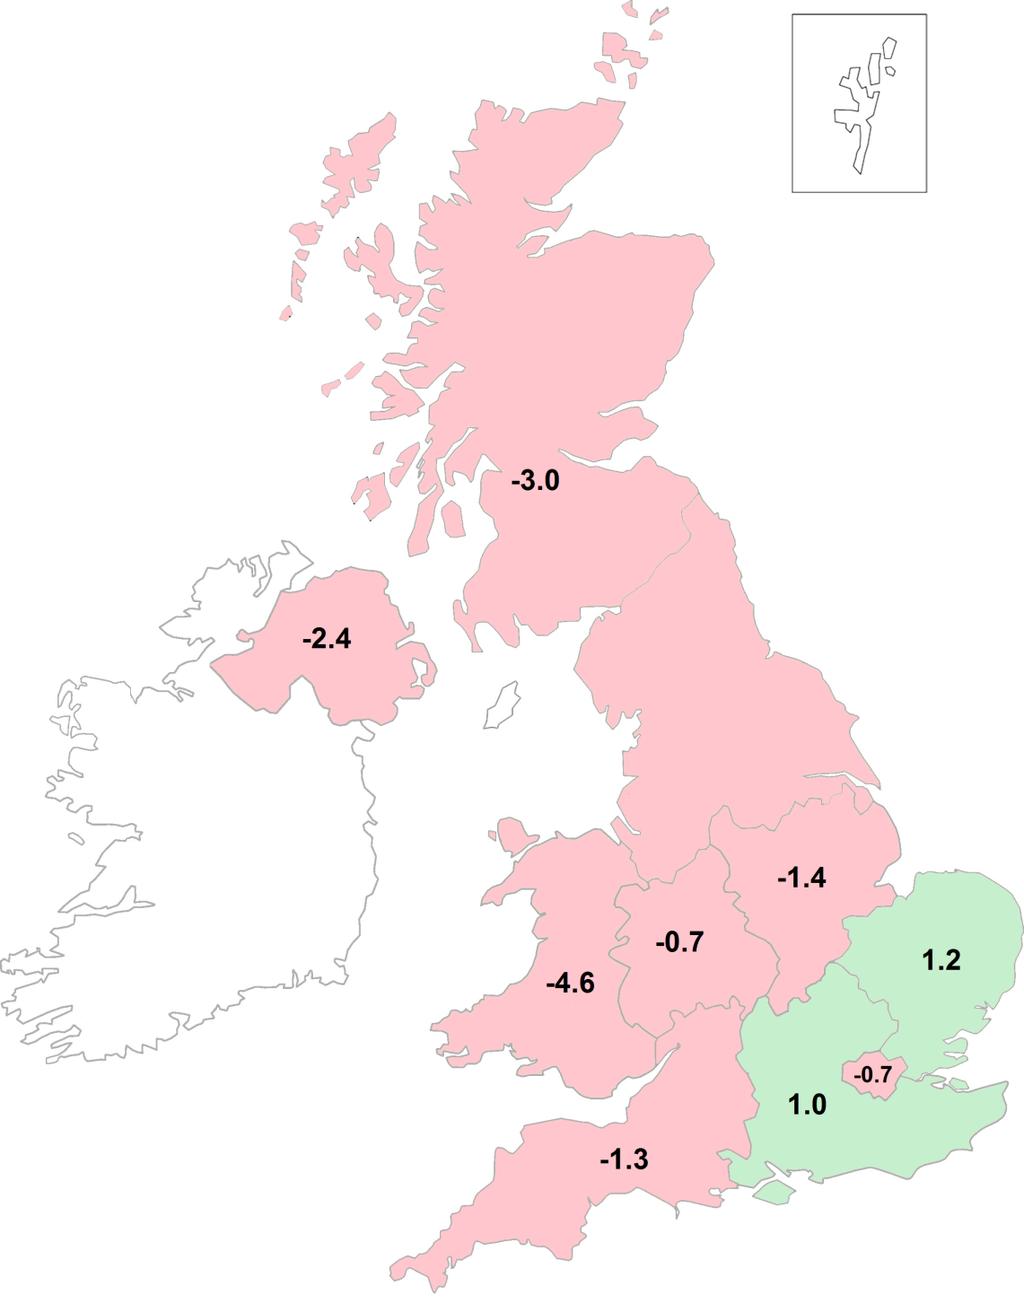 Country and Region Footfall and Vacancy Analysis Five regions in England reported footfall above the UK average East (1.2%), South East (1.0%), Greater London (-0.7%), West Midlands (-0.